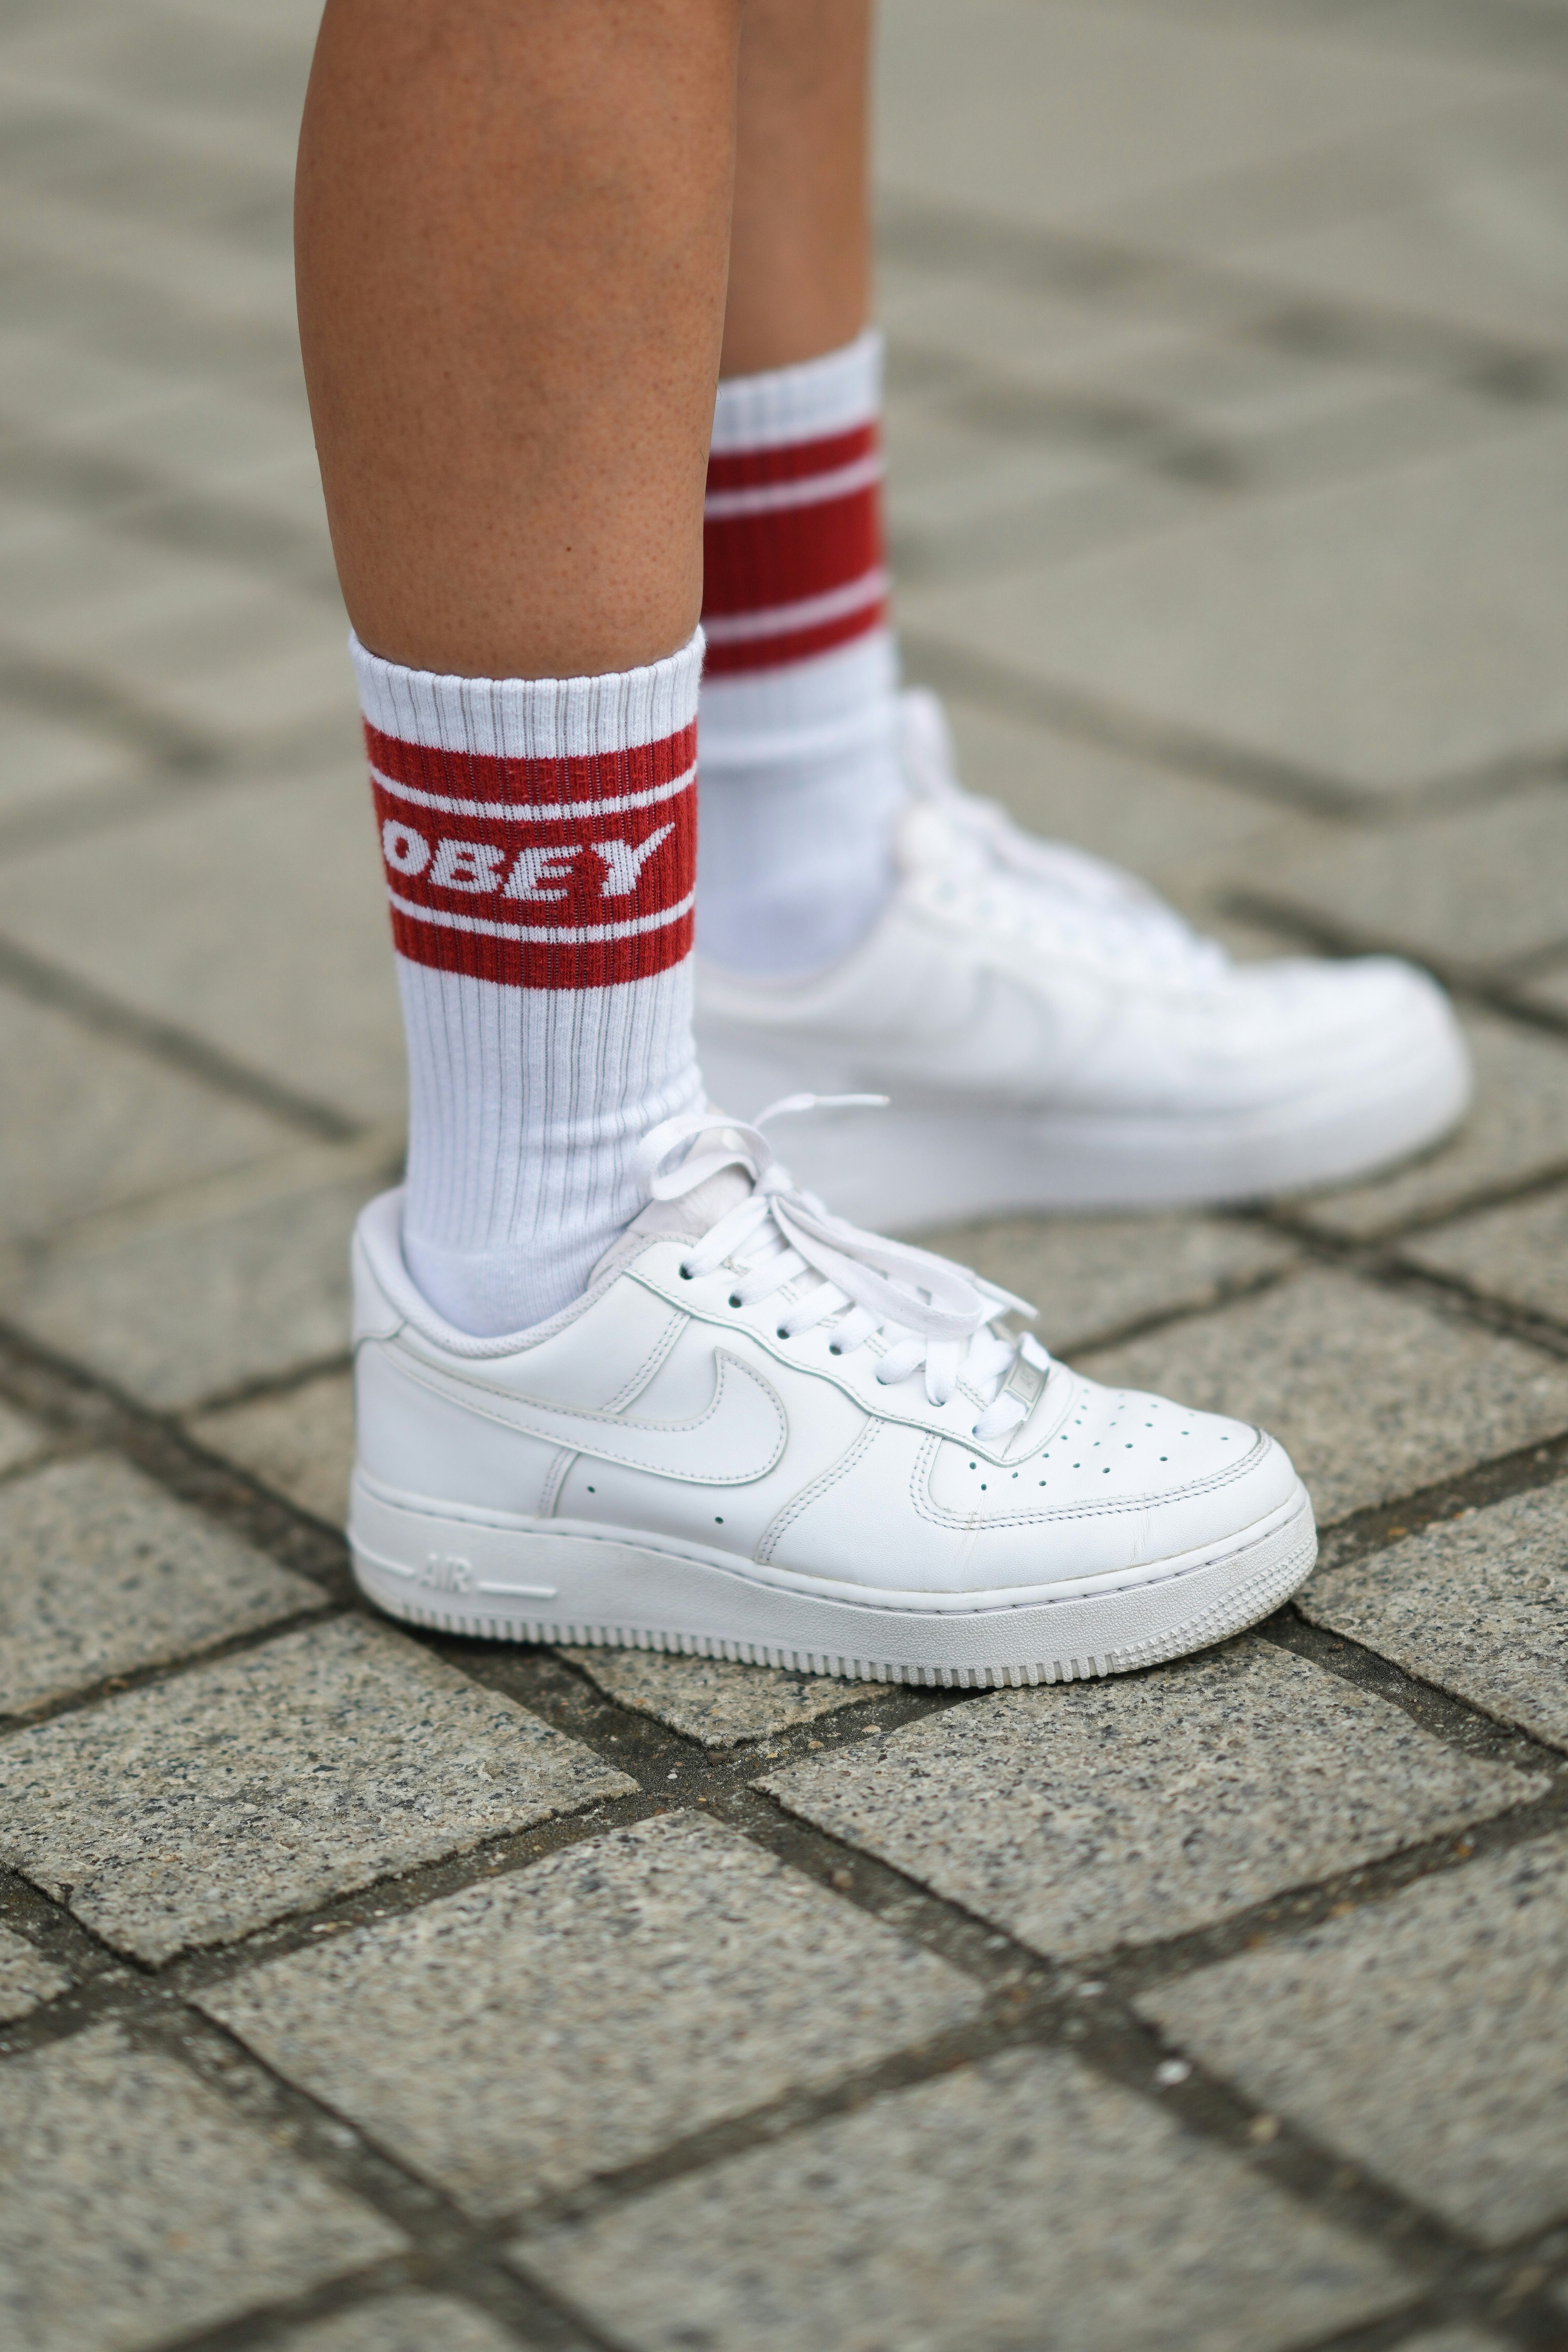 what socks do you wear with nike air force 1